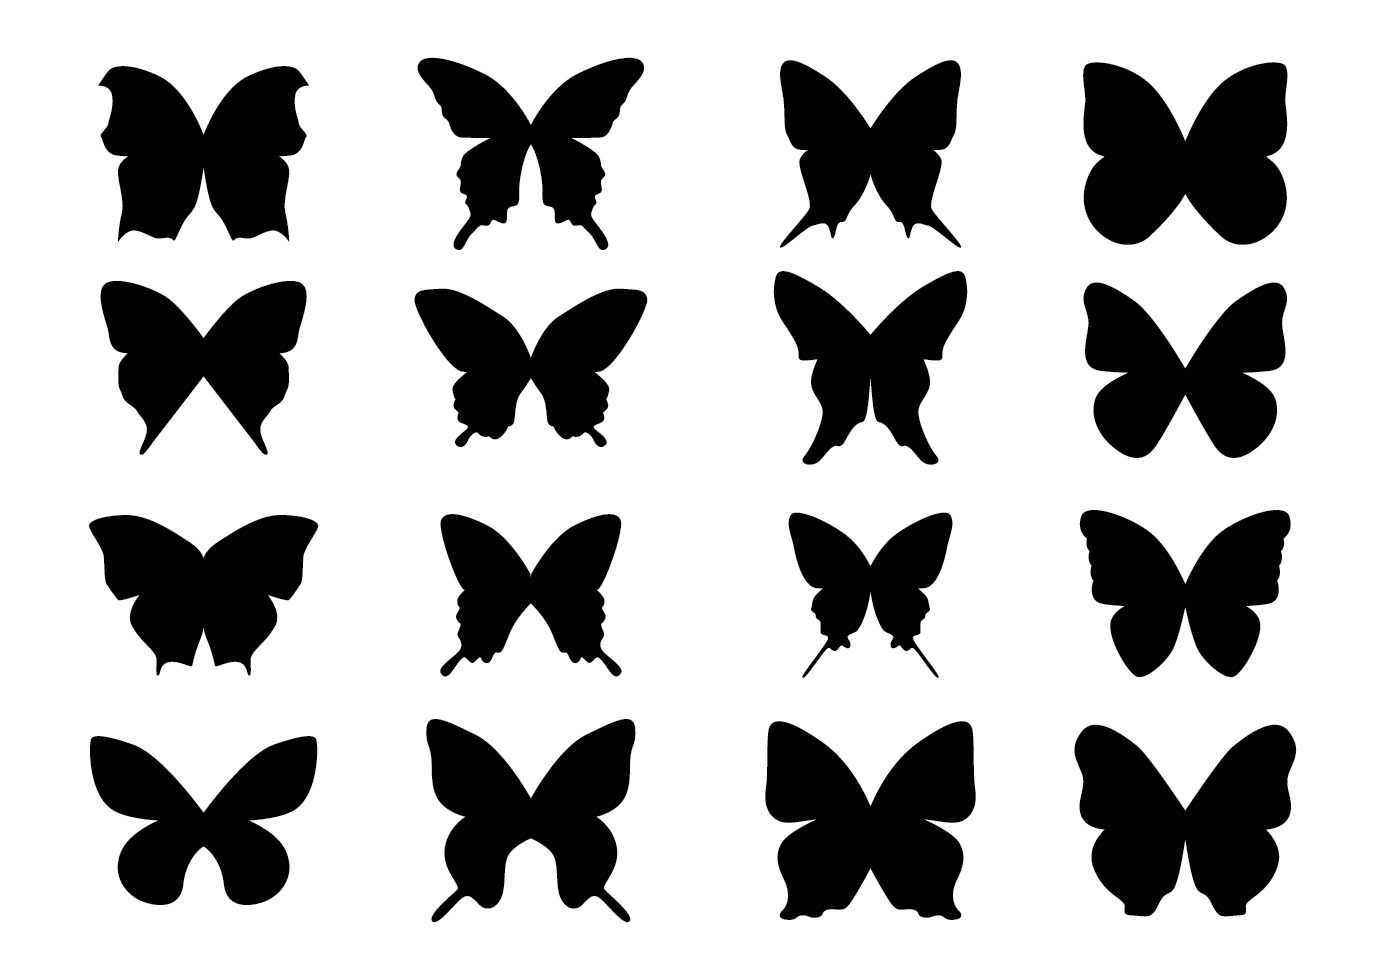 Download Butterfly Free Vector Art - (11904 Free Downloads)